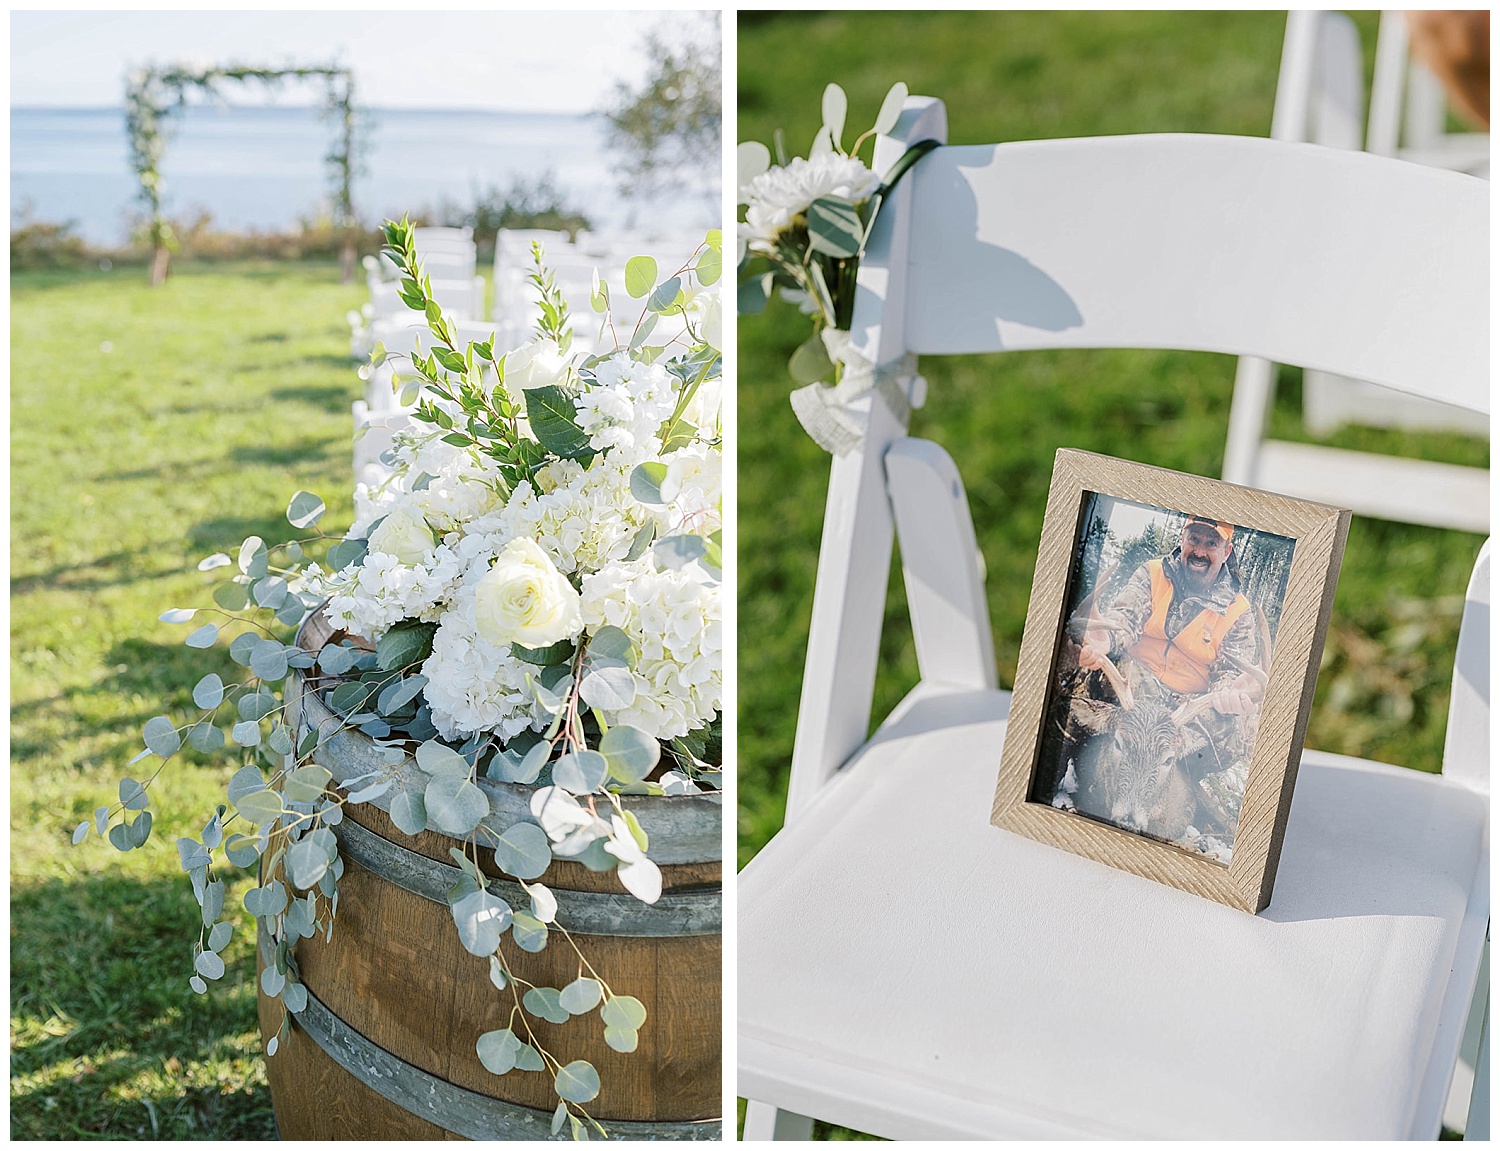 details of wedding flowers and photo of bride's late father